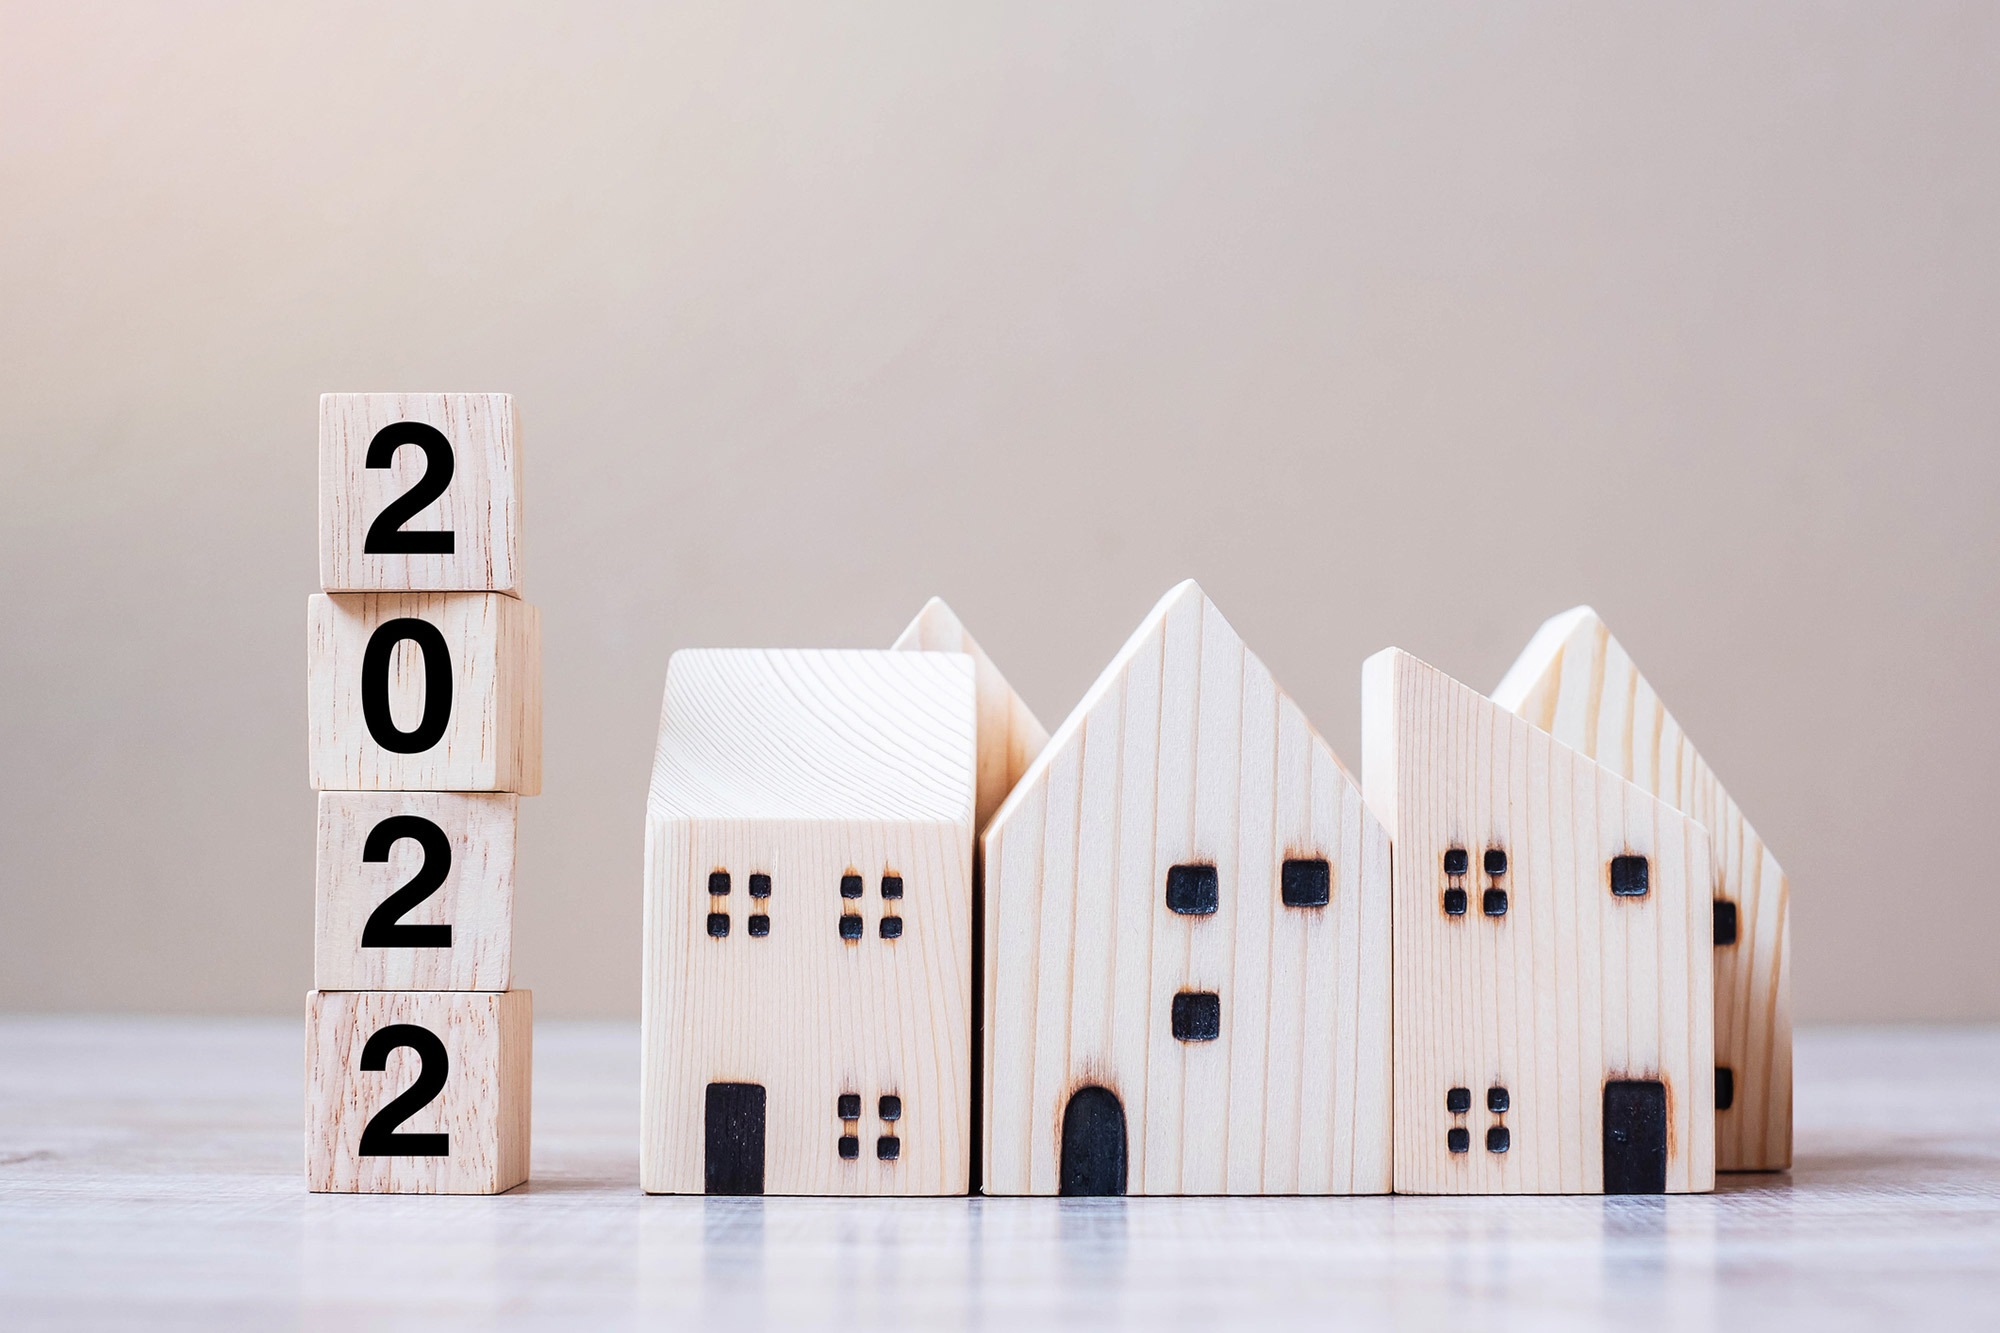 Has the property market reached its peak or will it continue to climb in 2022?